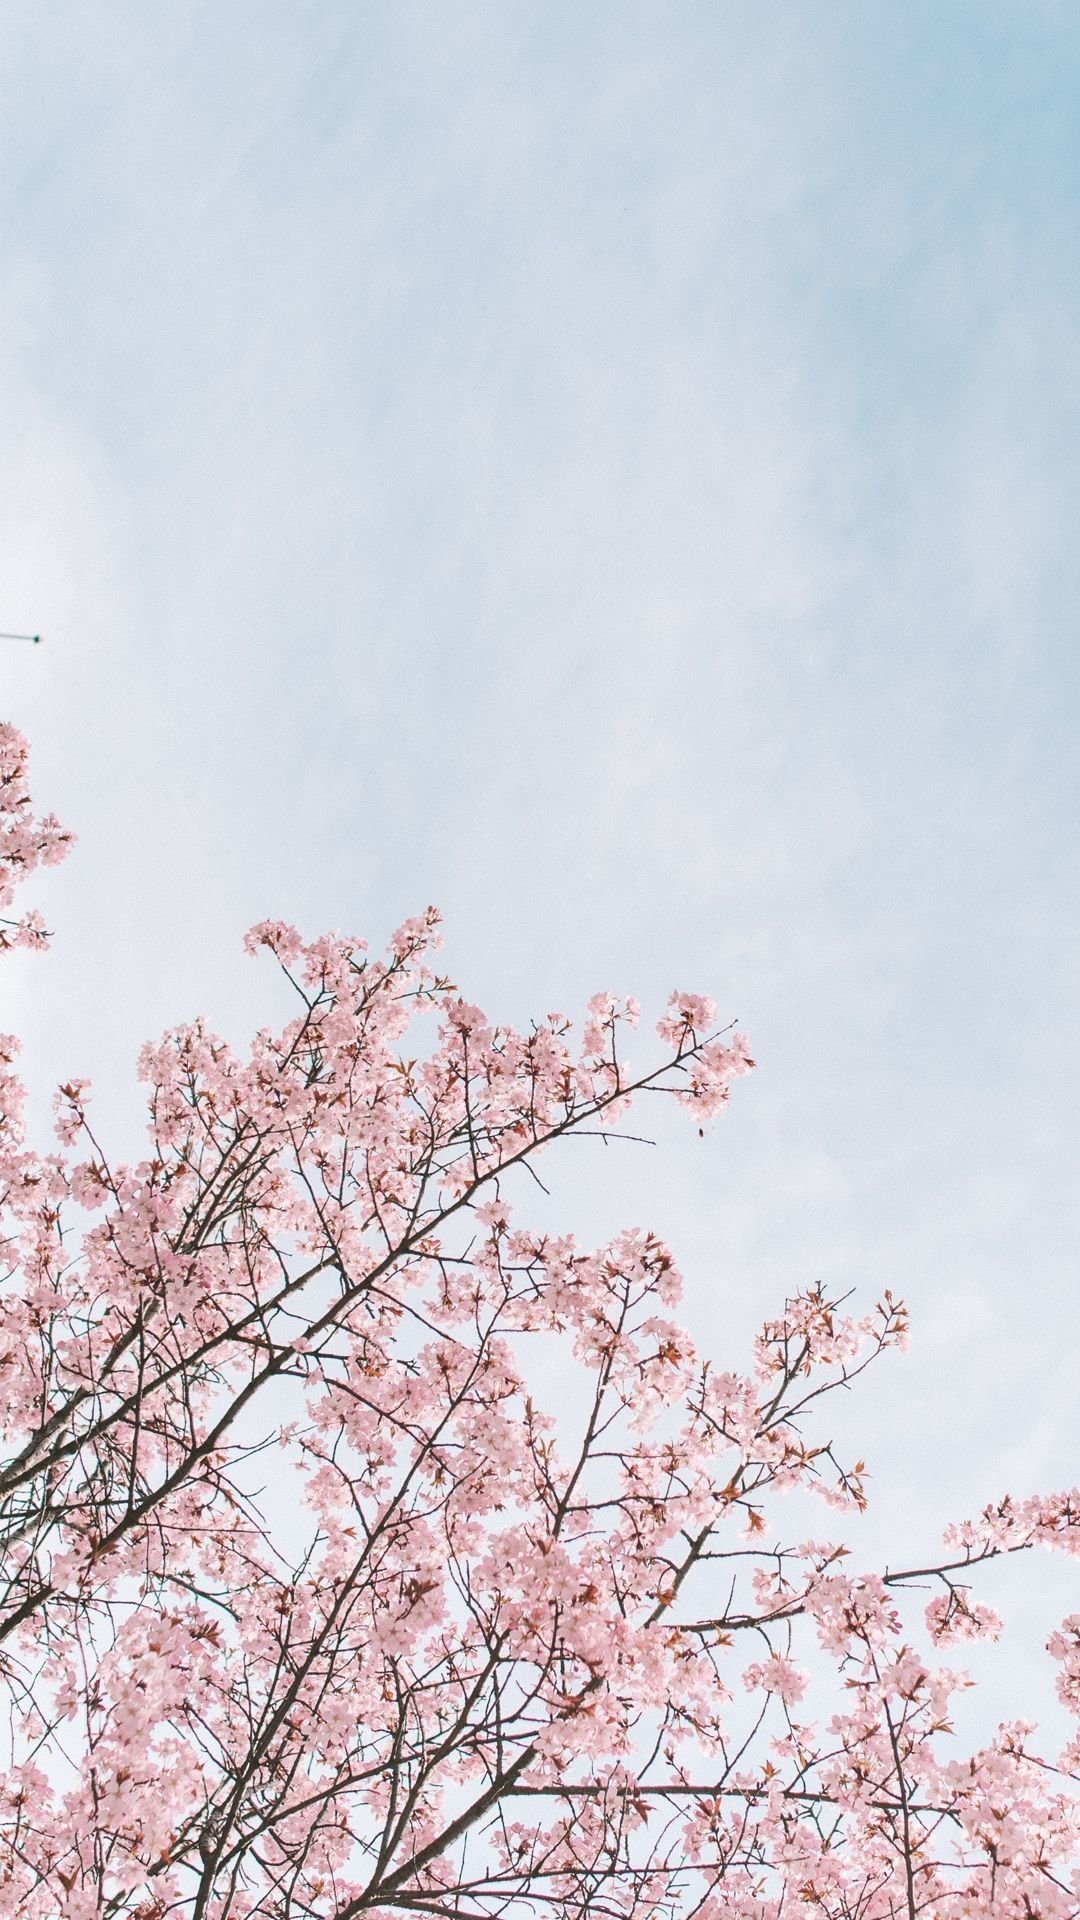 iPhoneXpapers.com | iPhone X wallpaper | nx72-spring-cherry-blossom-tree -flower-pink-nature